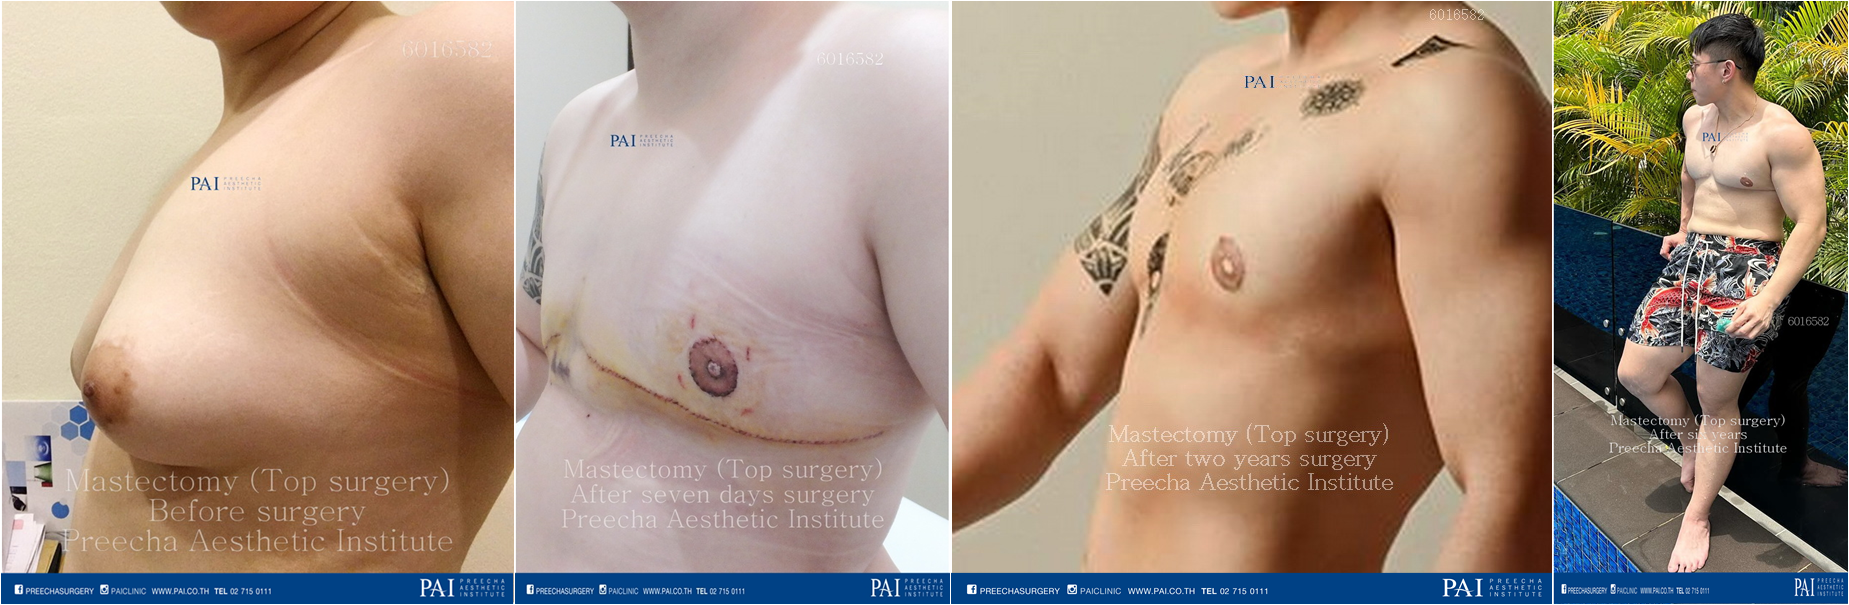 mastectomy top surgery breast removal before and after female to male breasts surgery